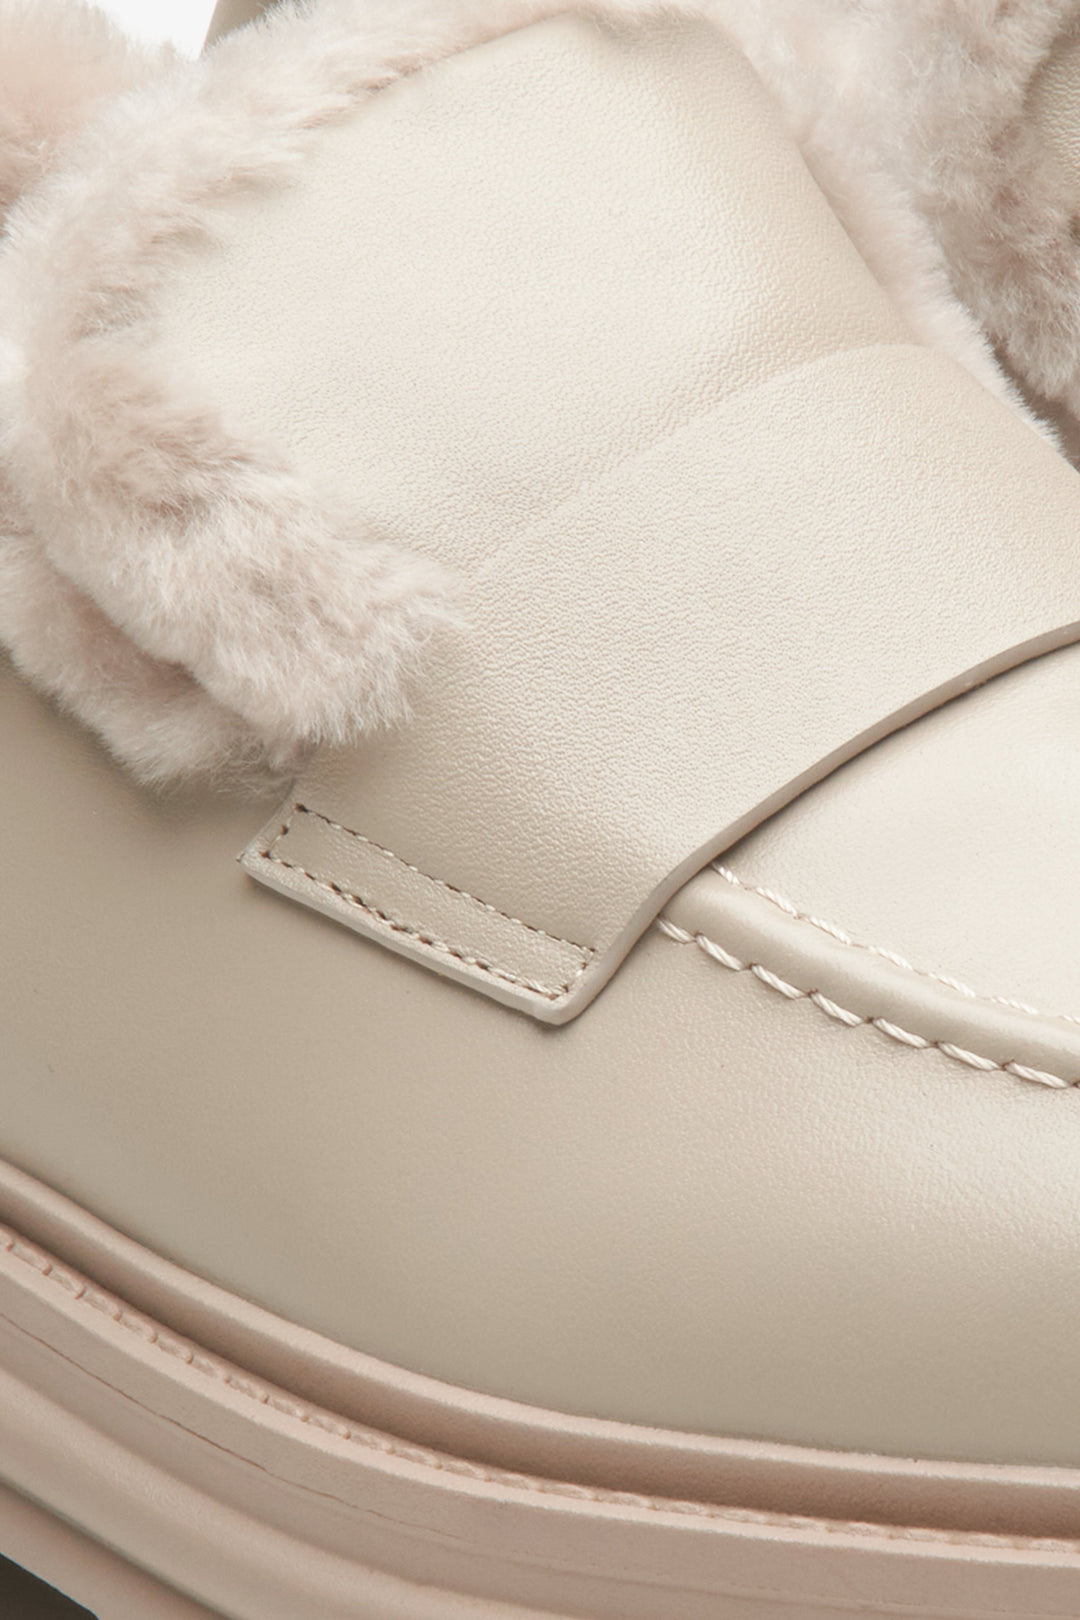 Leather beige women's moccasins by Estro with winter insulation - close-up on the details.